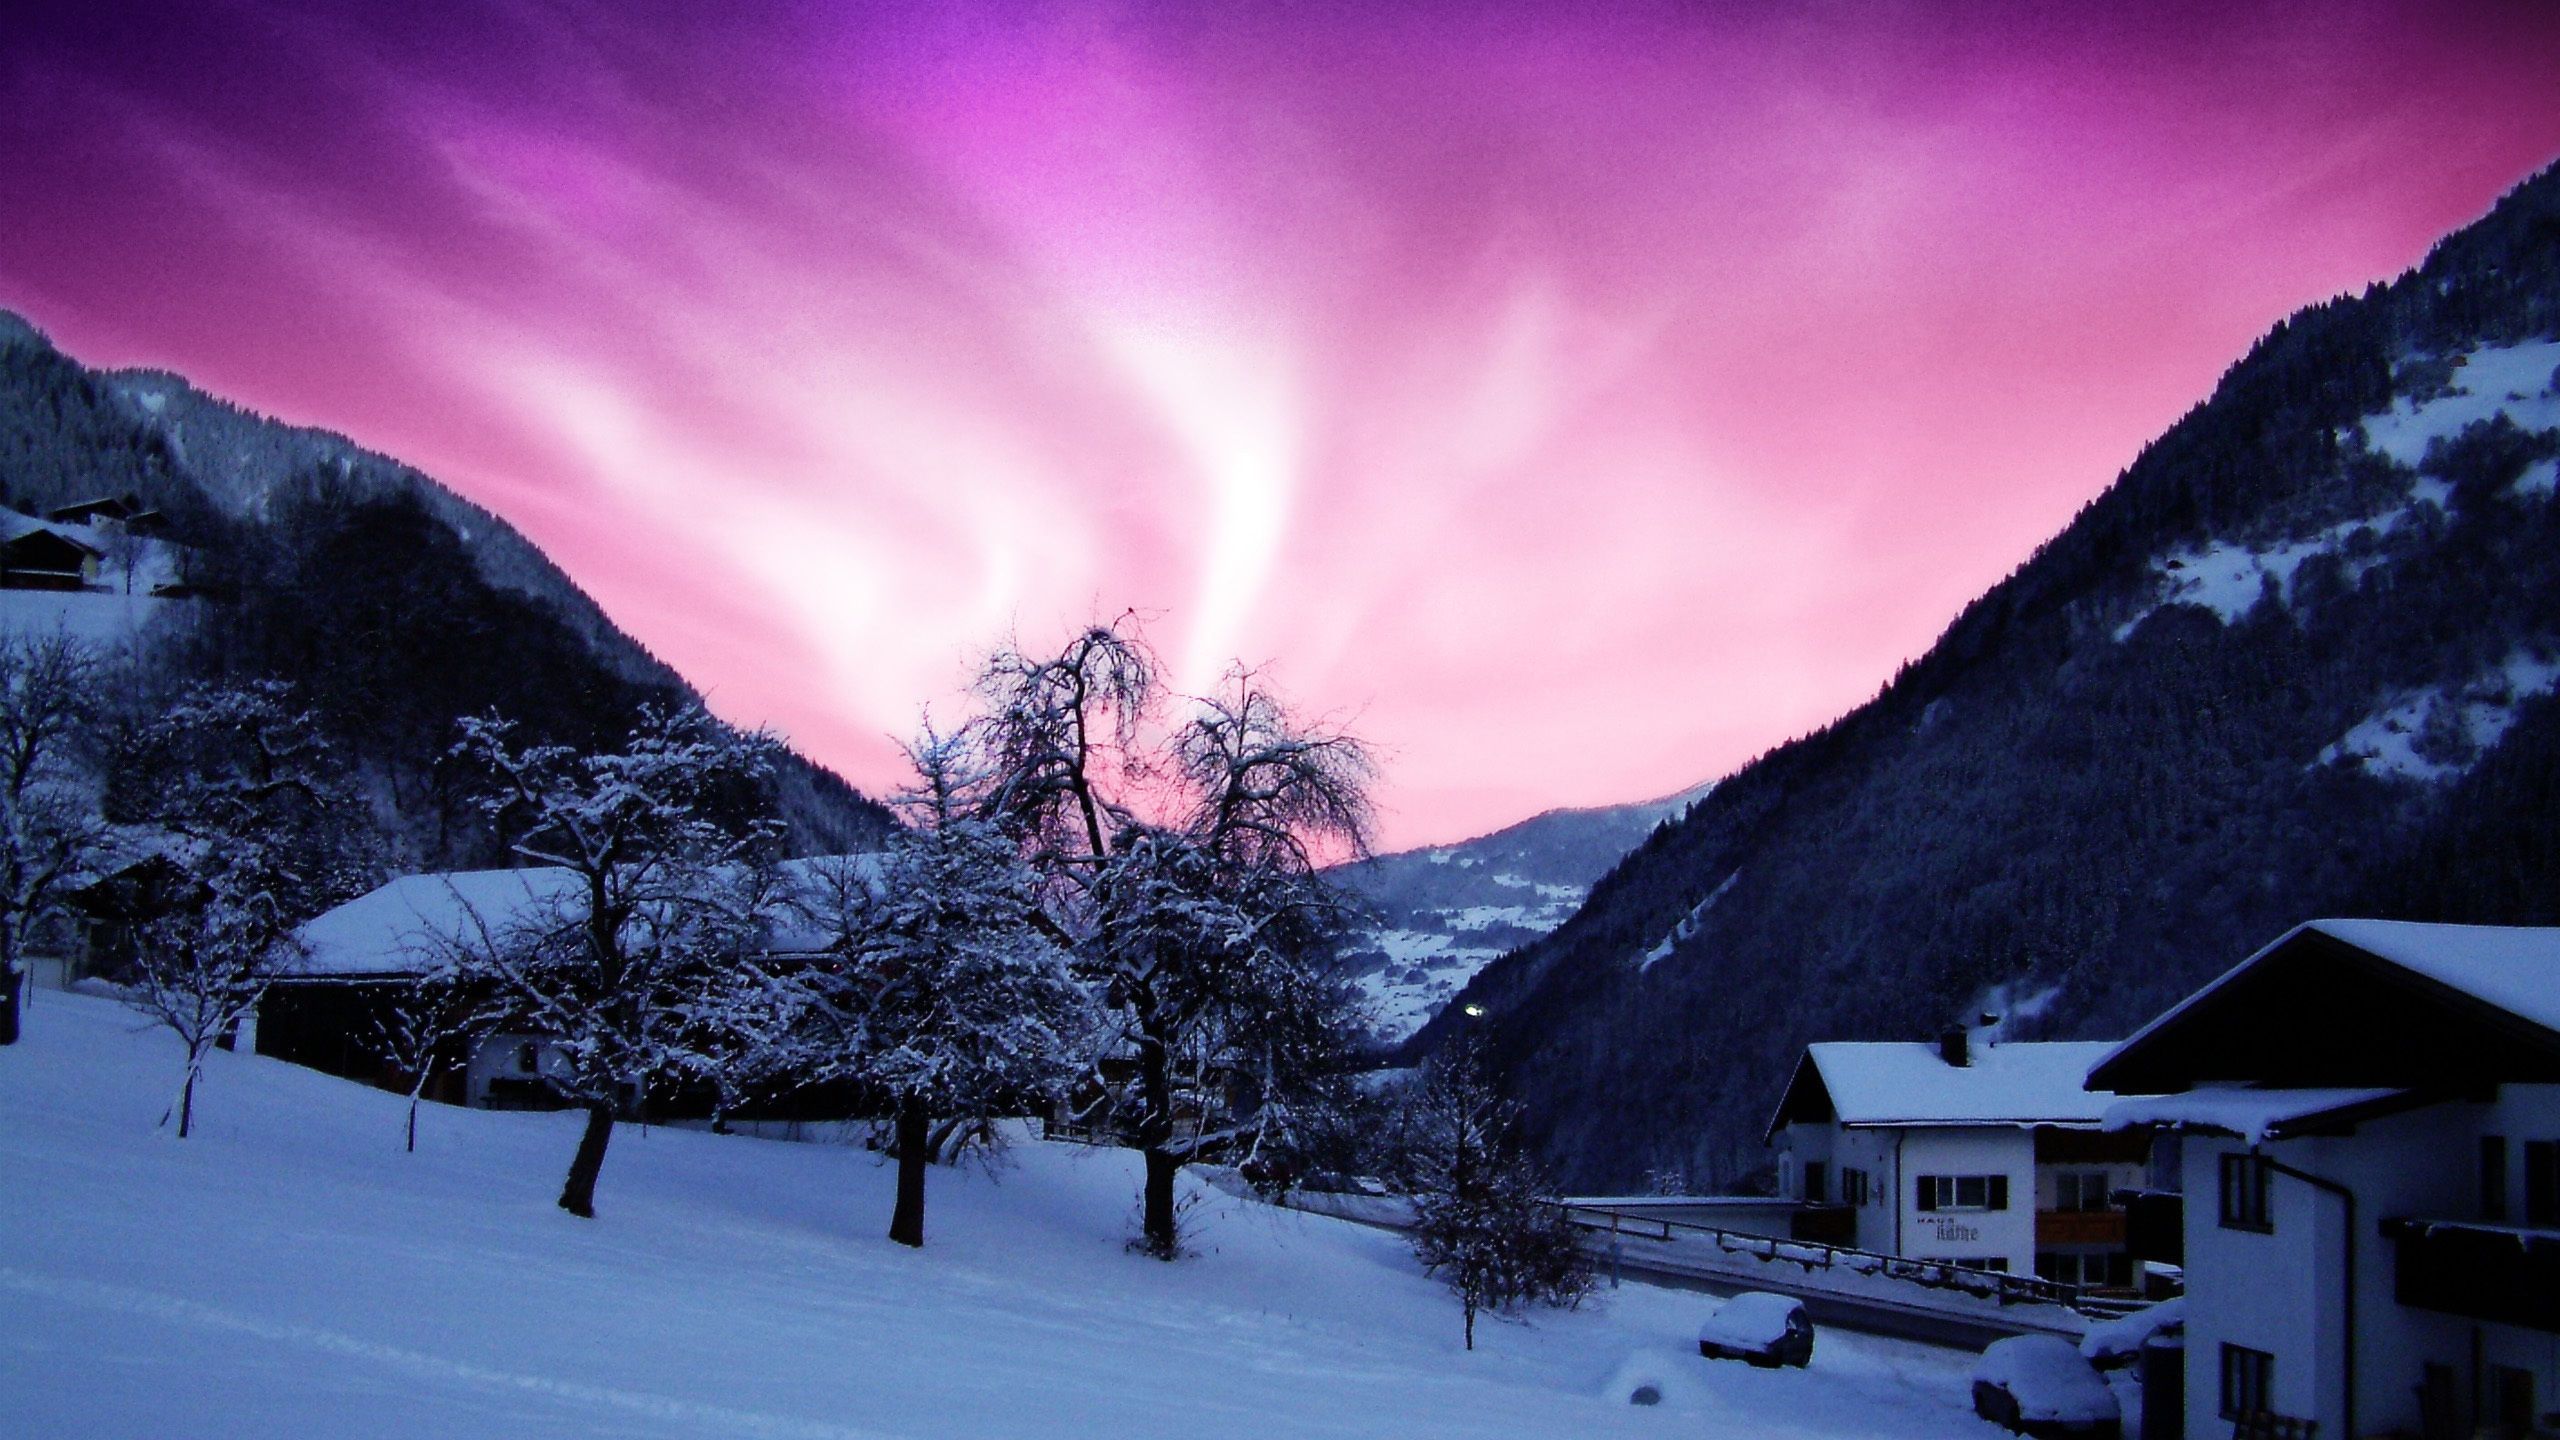 HD Beauty Of The Northern Lights Purple Sky Cold Winter House HD Wallpaper Of Northern Lights Wallpaper